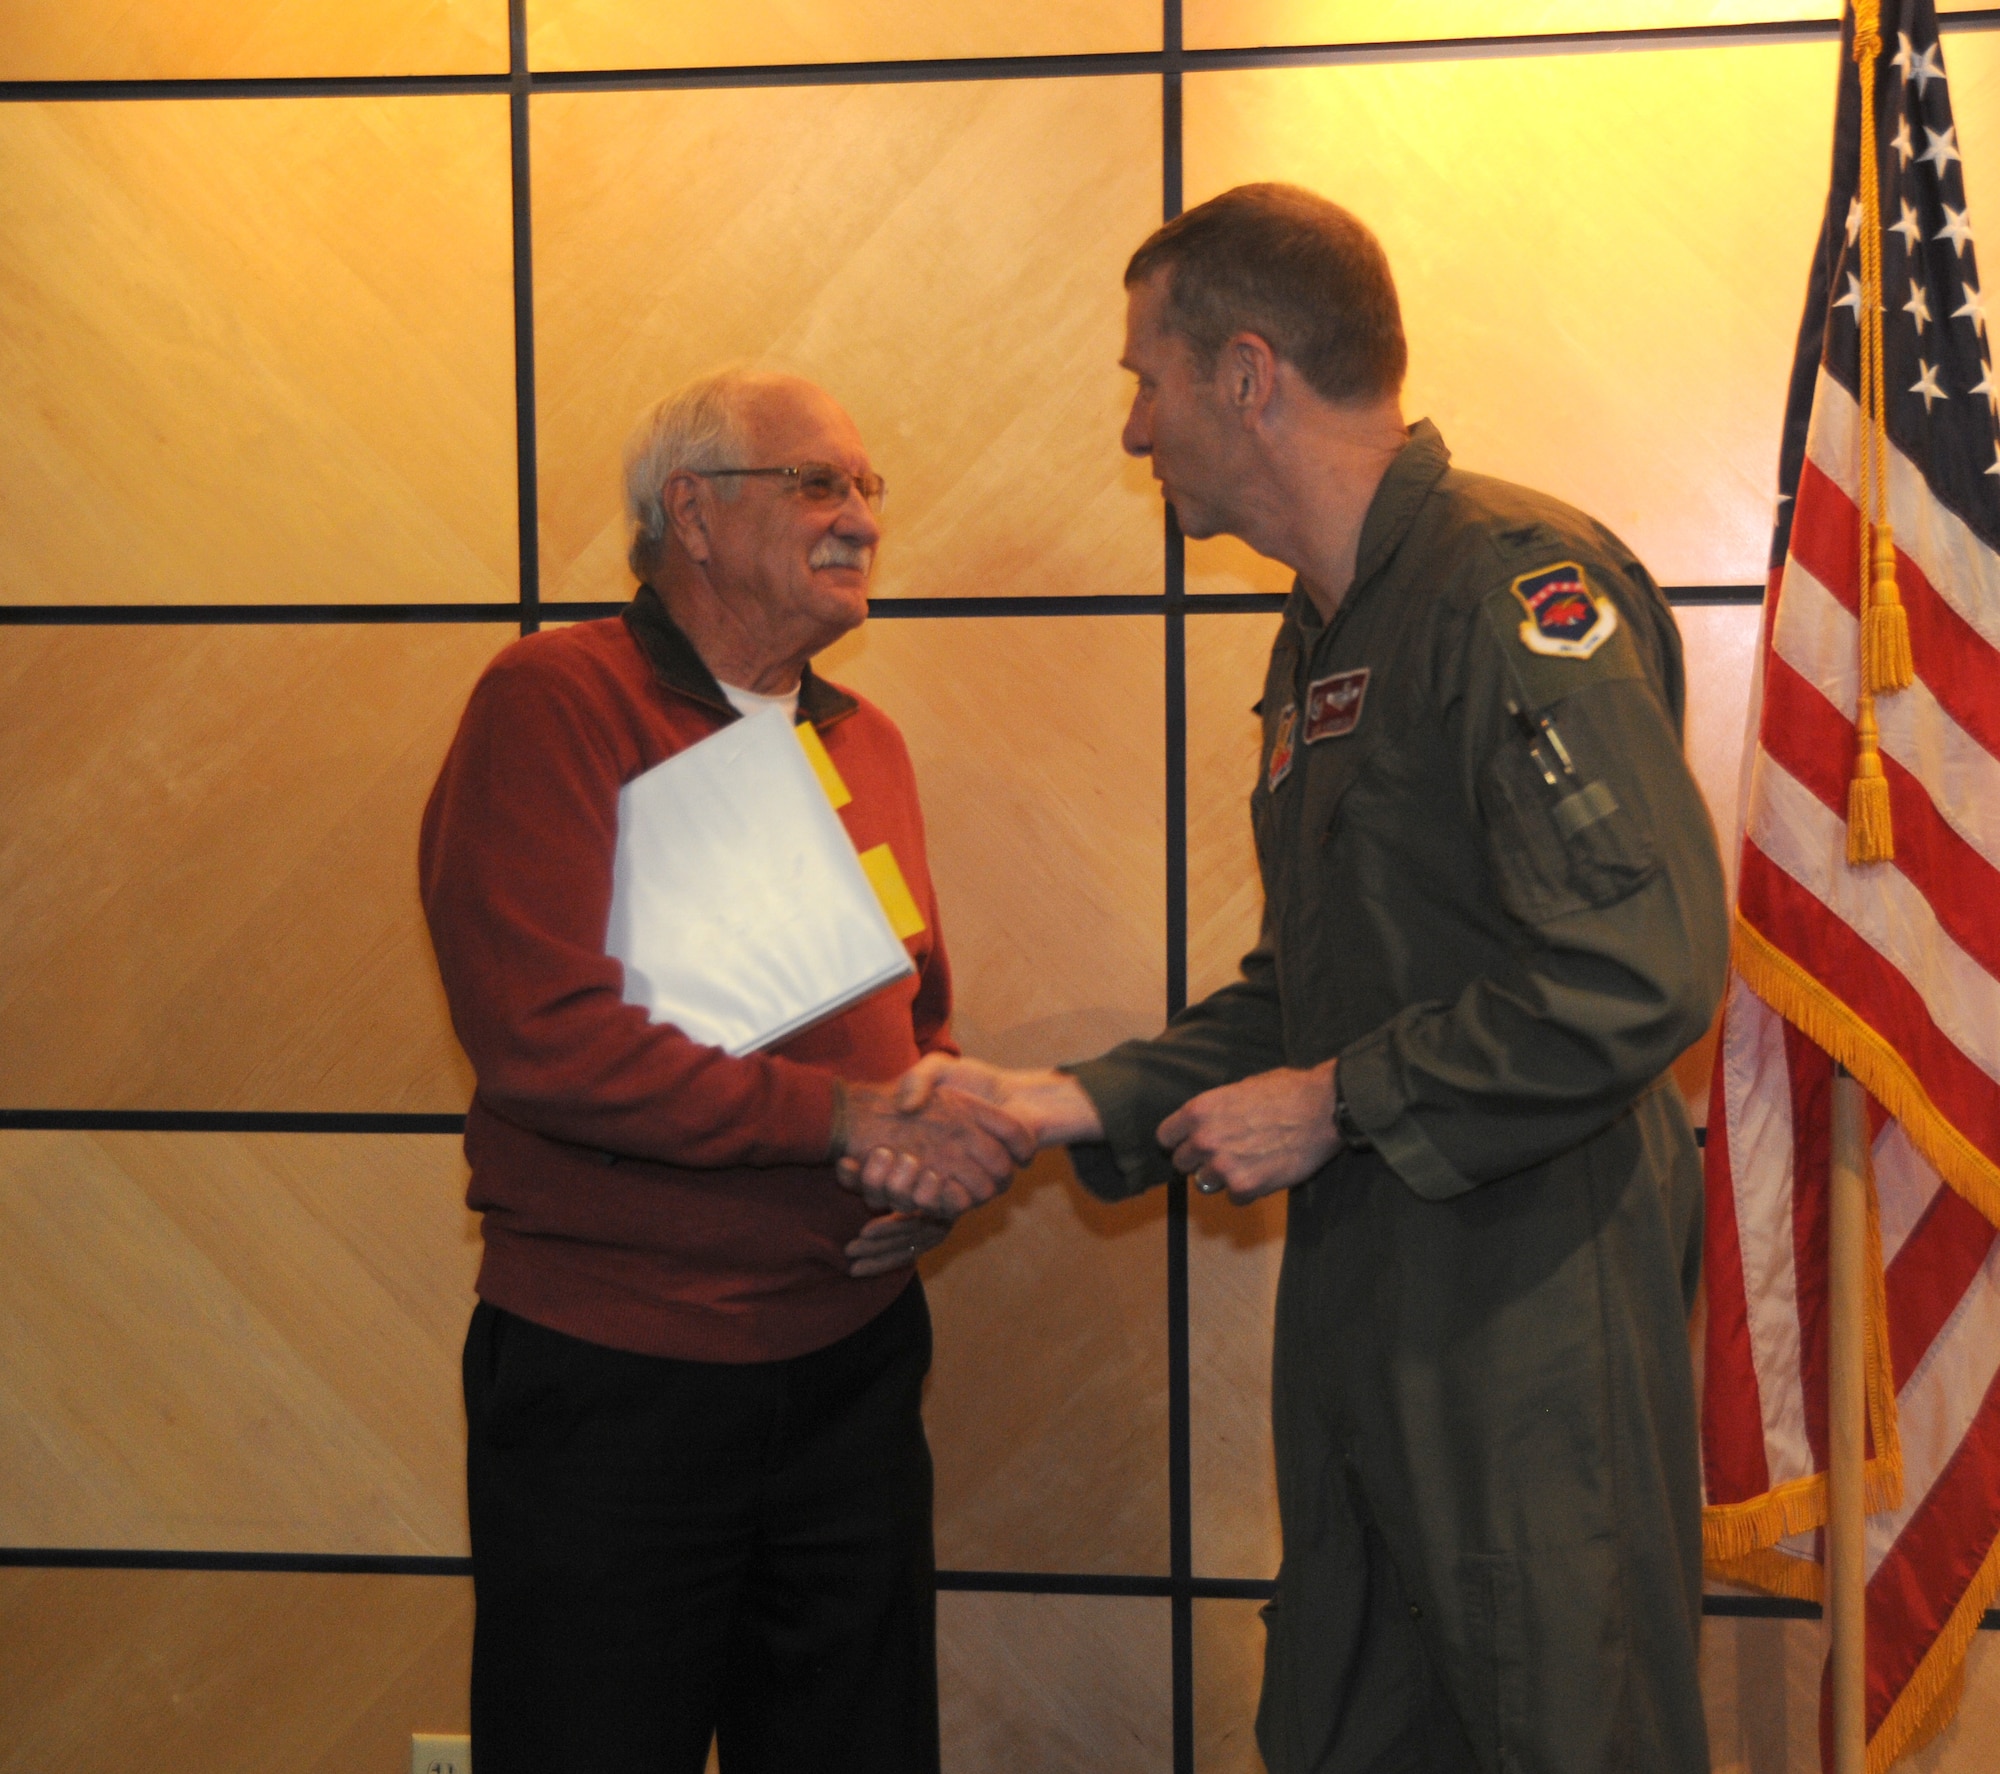 Col. Mark Anderson, 188th Wing commander, presents Mr. Larry Brown with a coin at Ebbing Air National Guard Base, Fort Smith, Ark., Jan. 9, 2015. Brown spoke to the service members about his son, U.S. Navy SEAL Adam Brown, whose story was made famous in the book "Fearless" by Eric Blehm. The book was written after his son made the ultimate sacrifice in support of Operation Enduring Freedom. (U.S. Air National Guard photo by Airman 1st Class Cody Martin/released) 